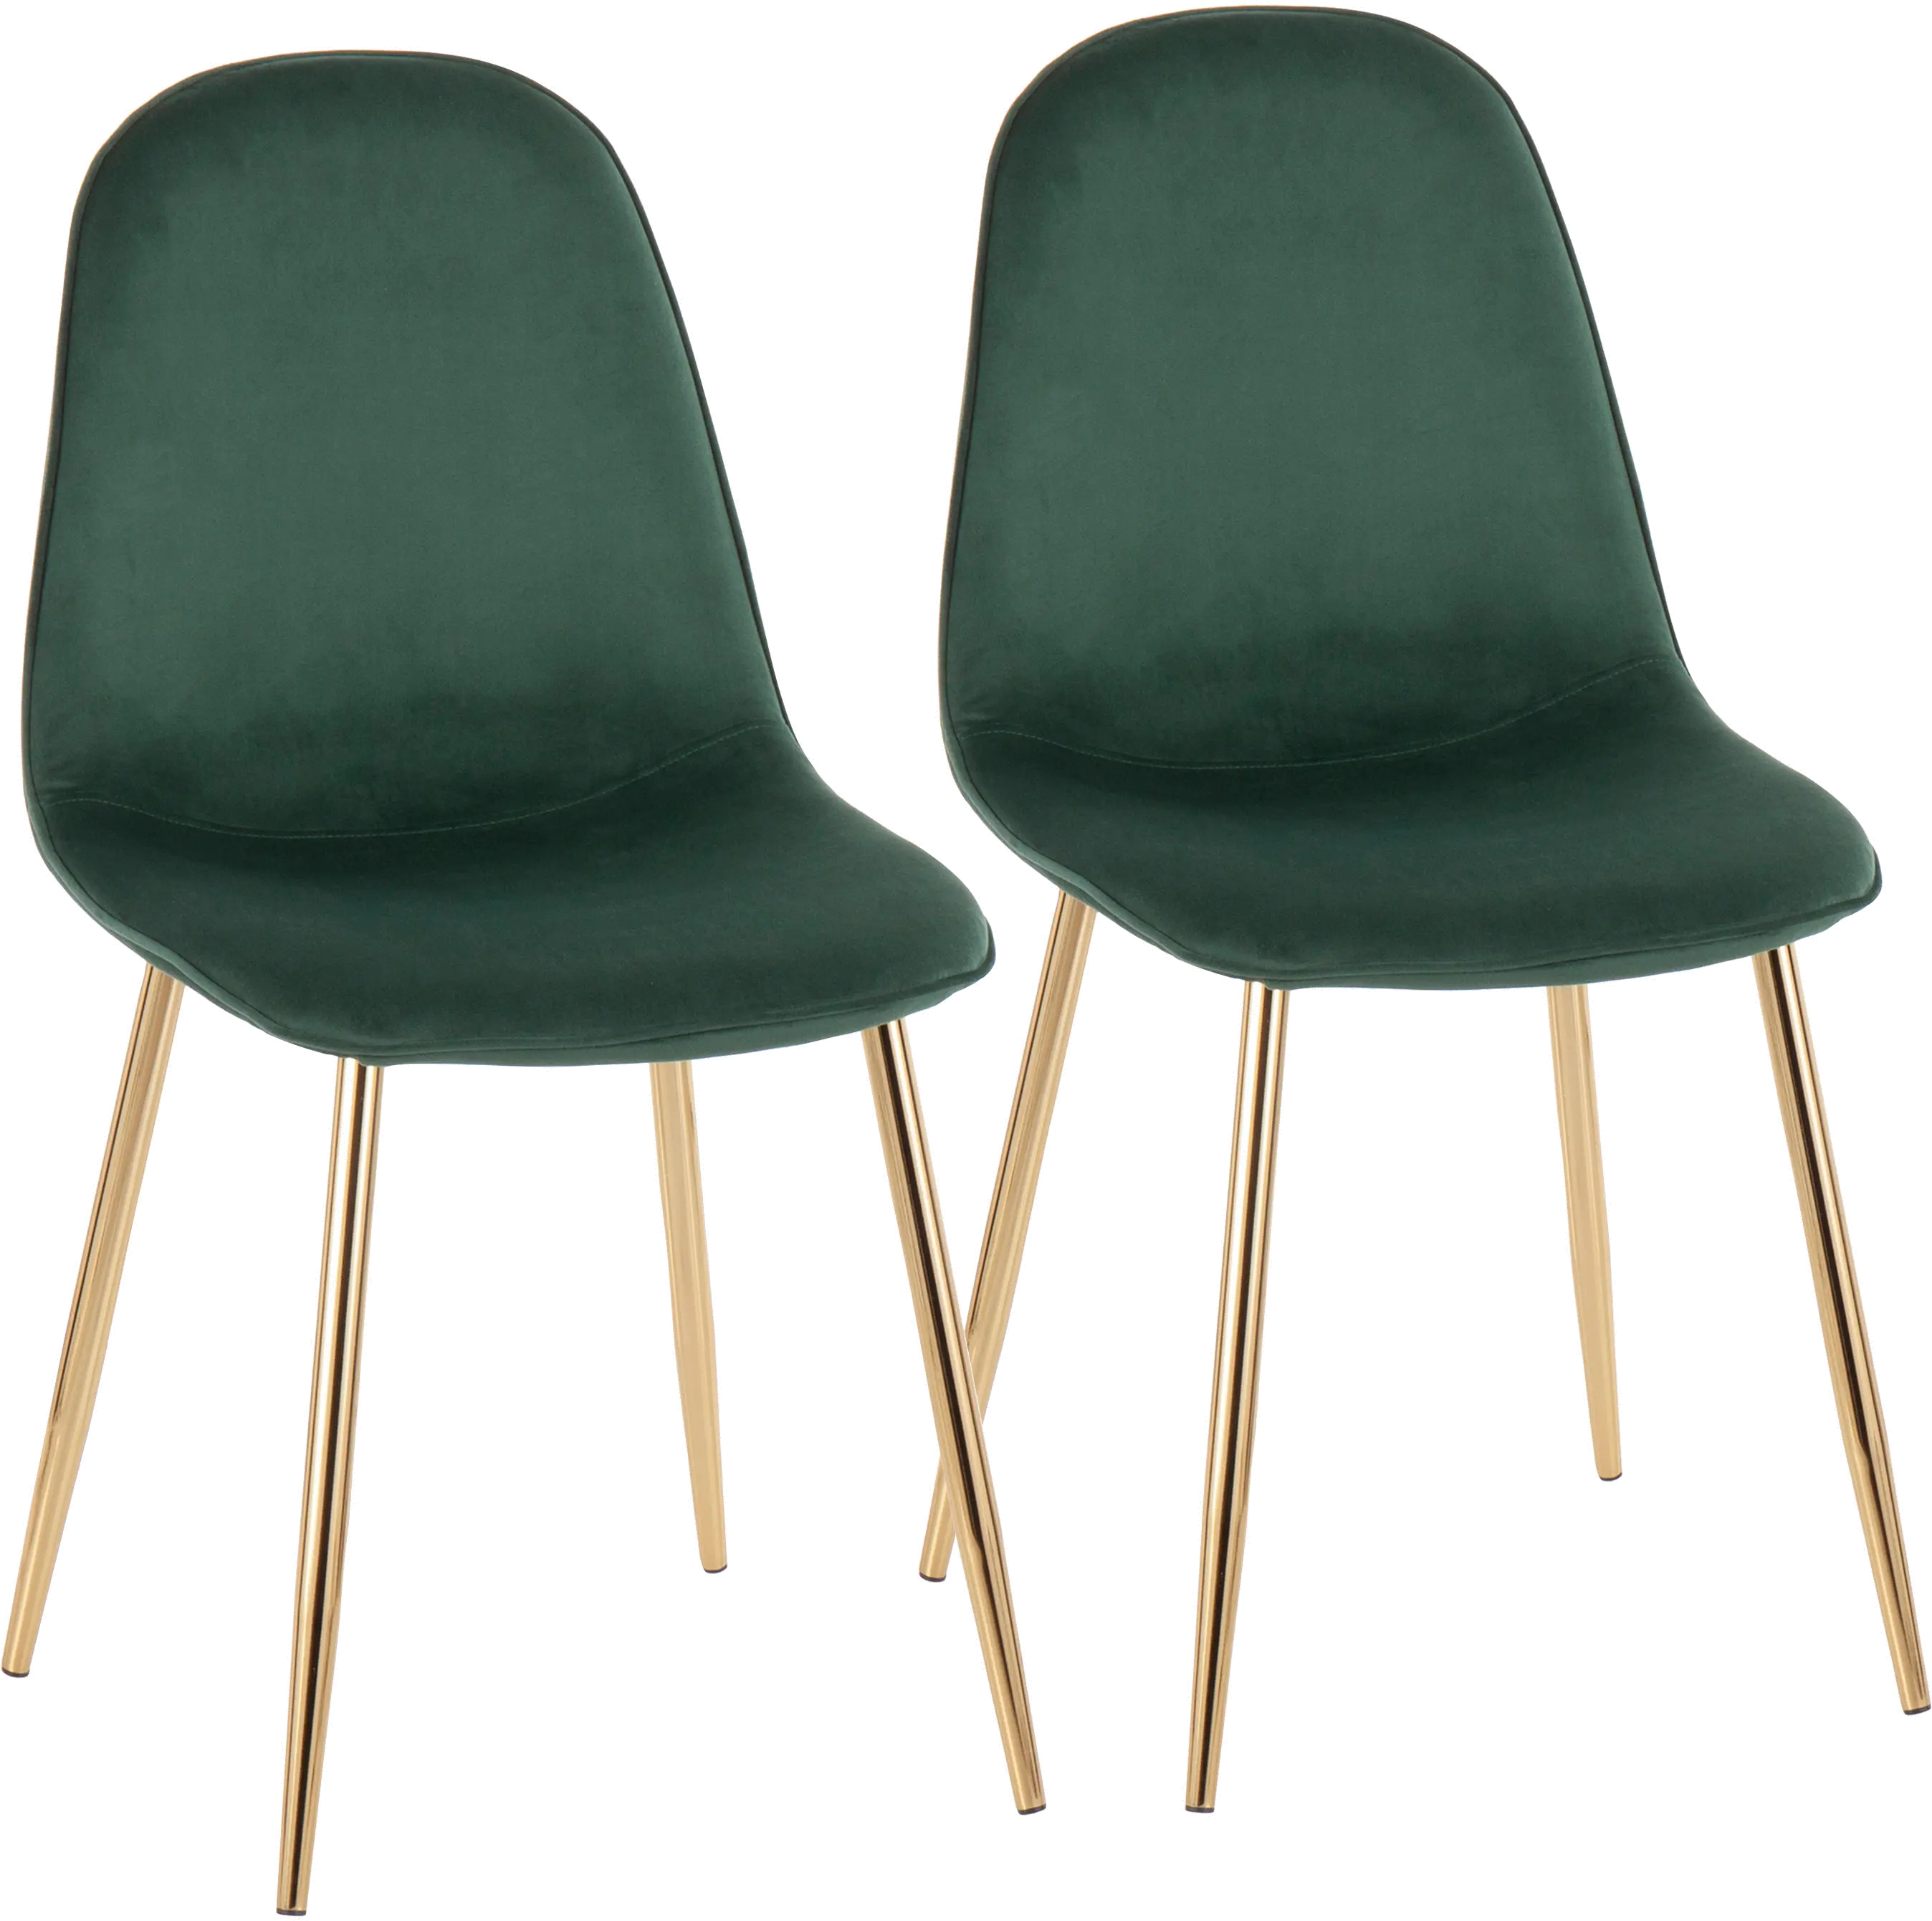 Contemporary Green and Gold Dining Room Chair (Set of 2) - Pebble